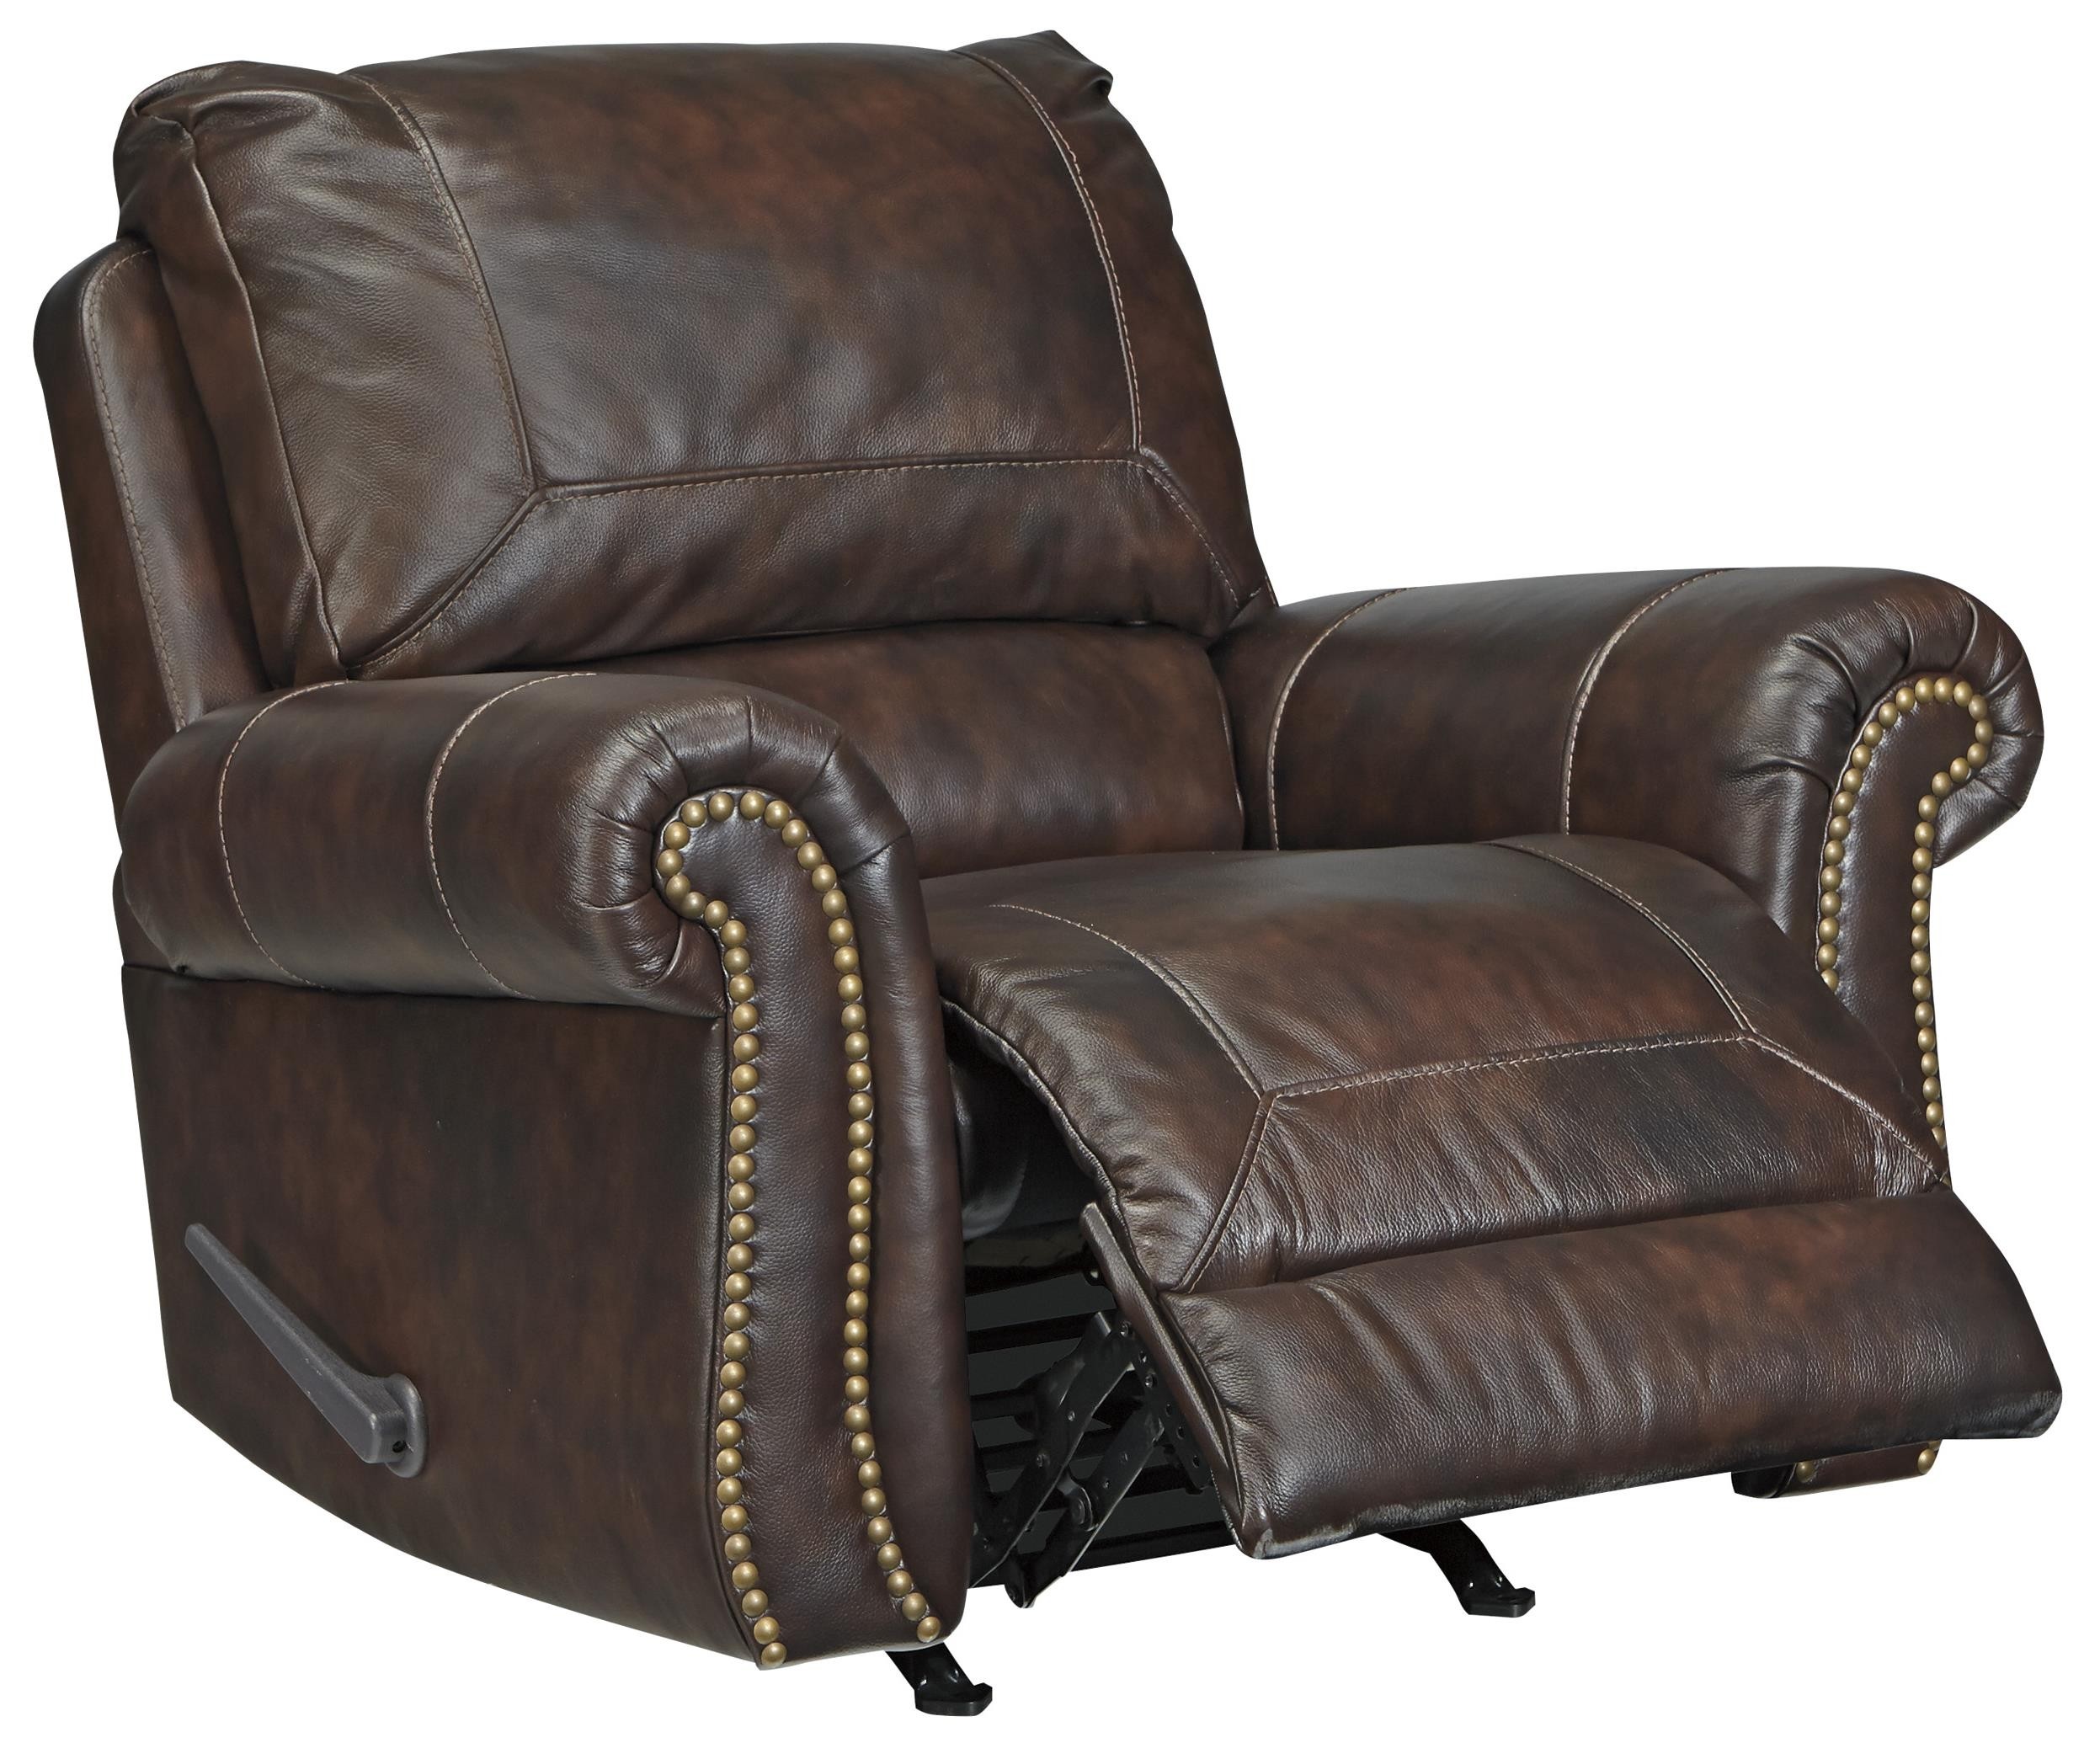 Bristan traditional leather match rocker recliner with 1